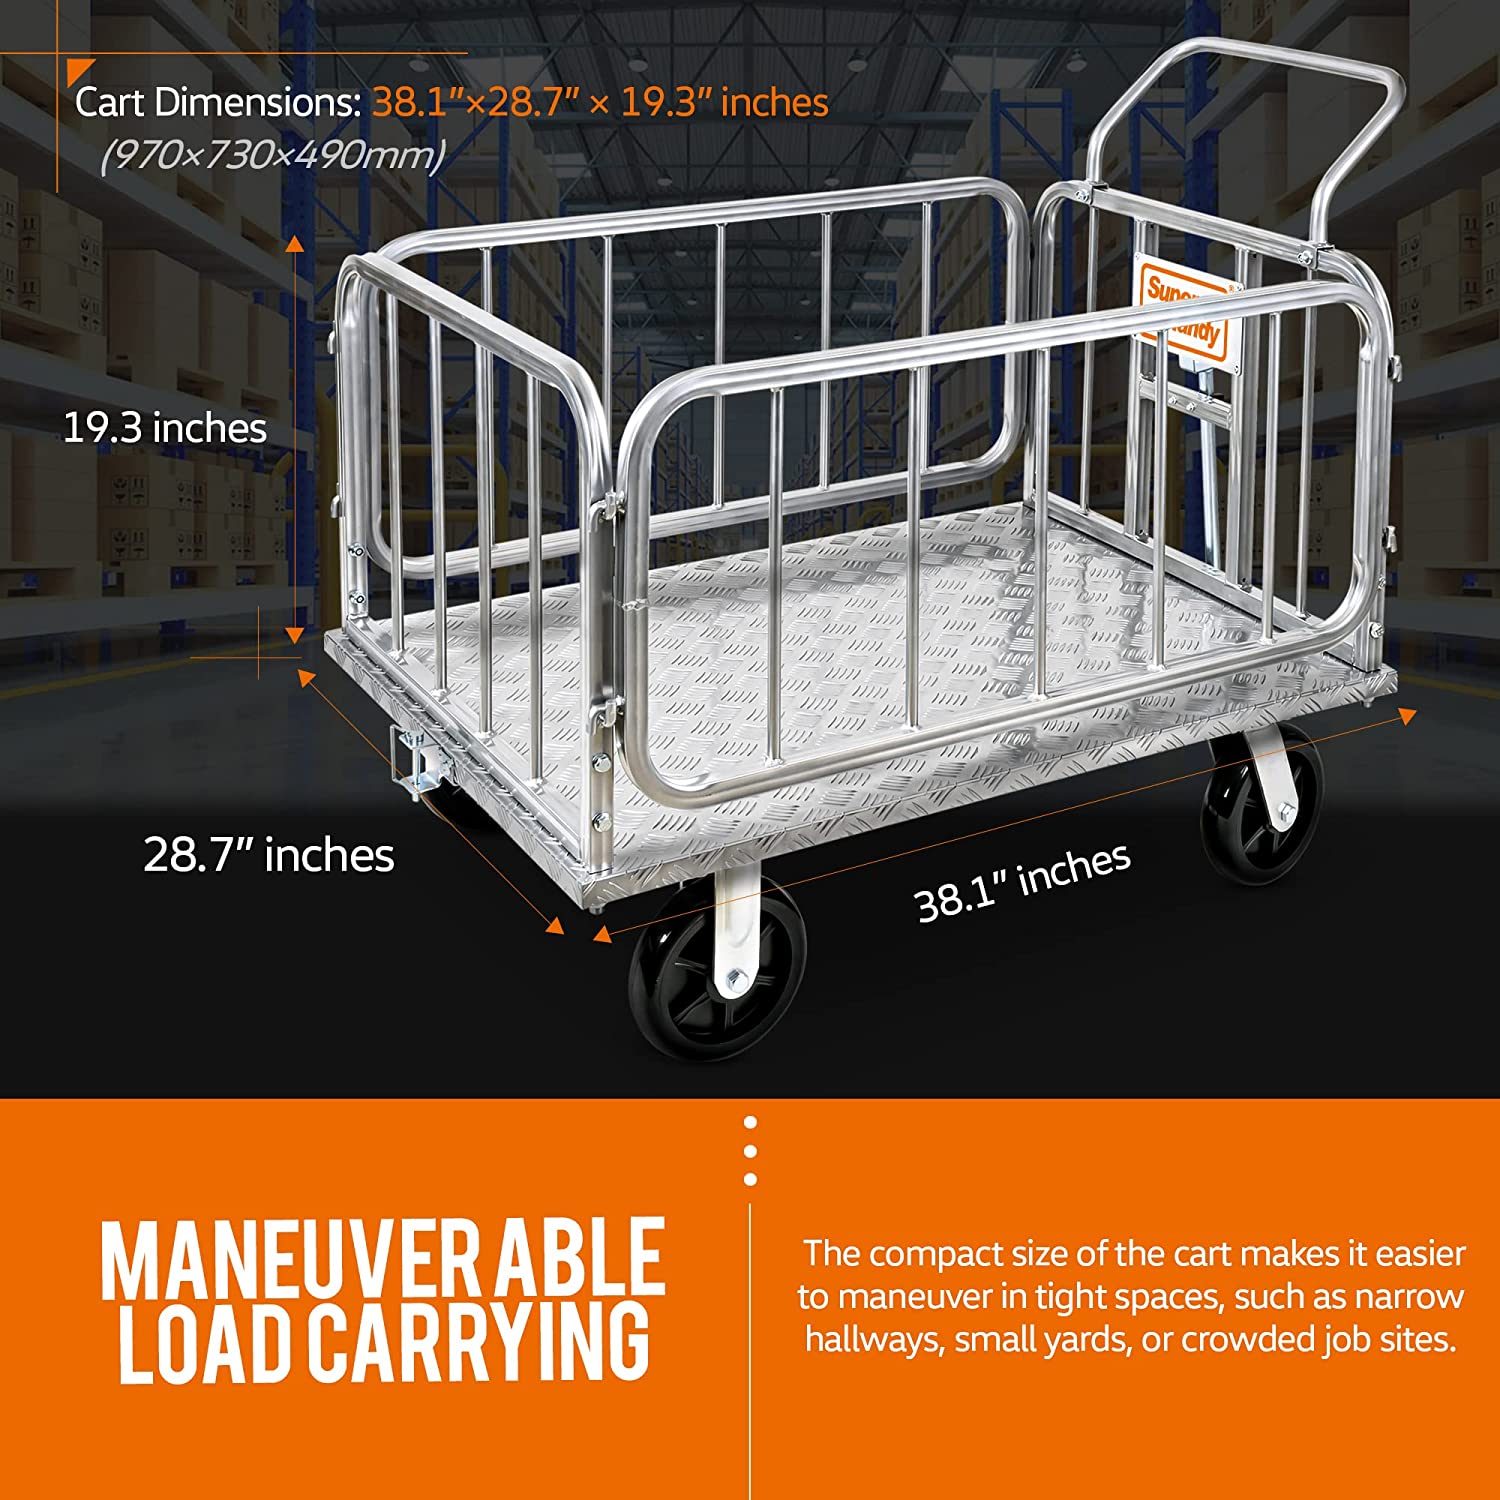 Platform Truck & Trailer - 1200Lb Capacity, Connects Directly to Utility  Tugger